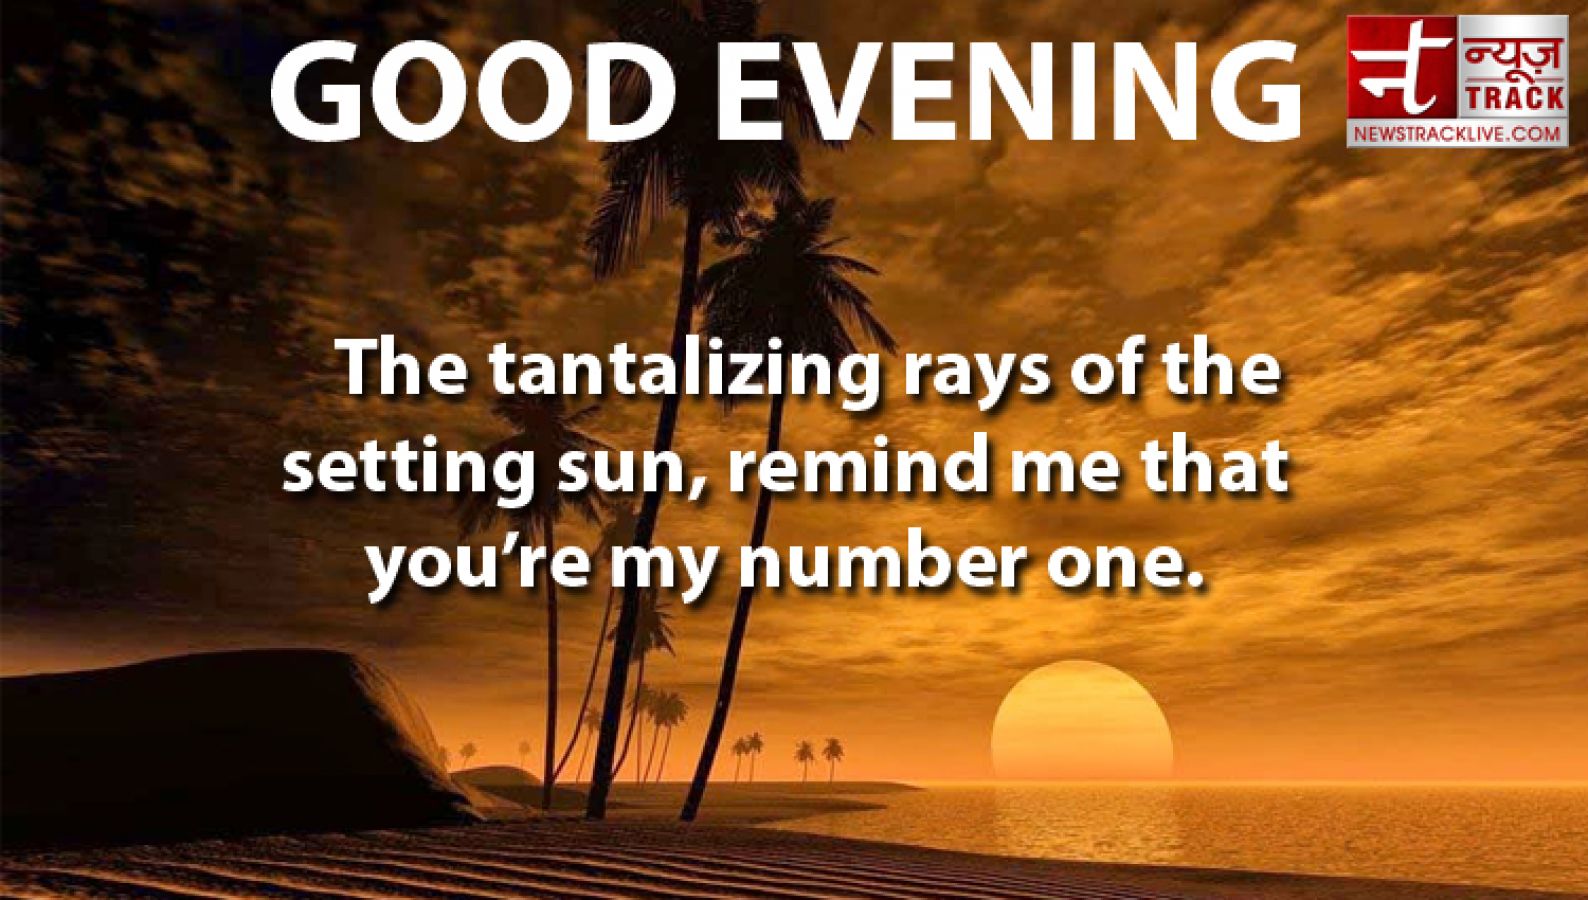 Best Good Evening Quotes in English | Inspirational and ...